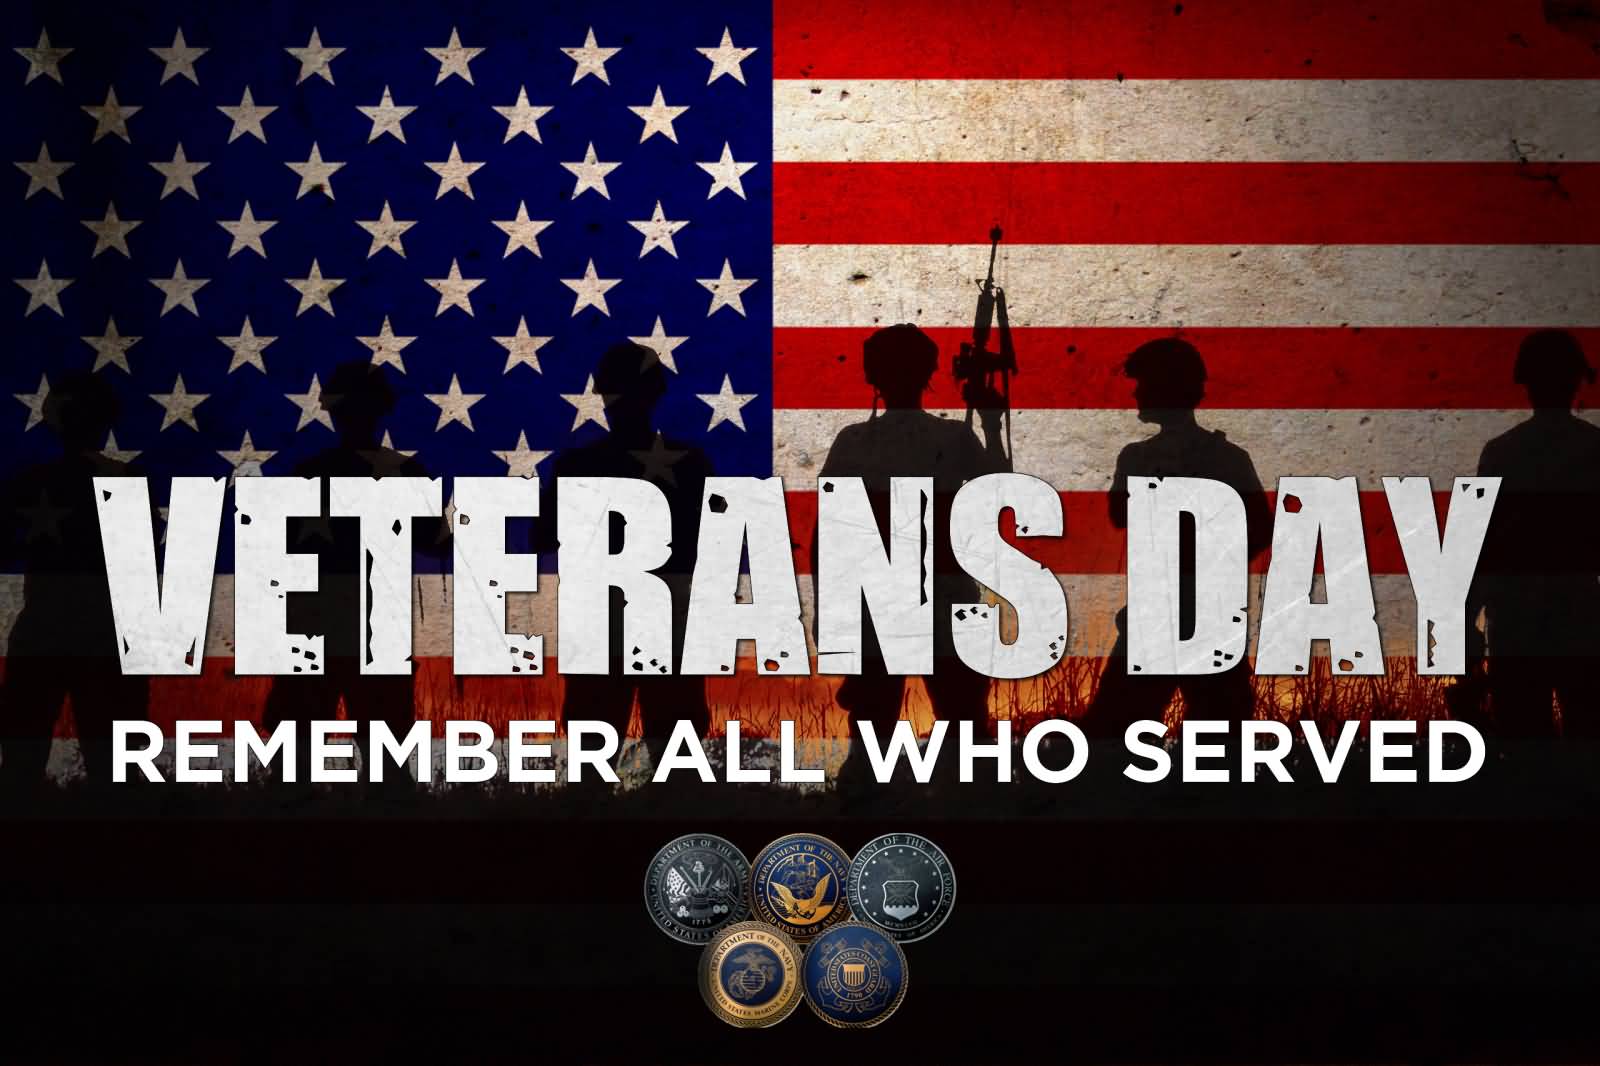 Veterans Day Image 2017 Free Download Veterans Day Image